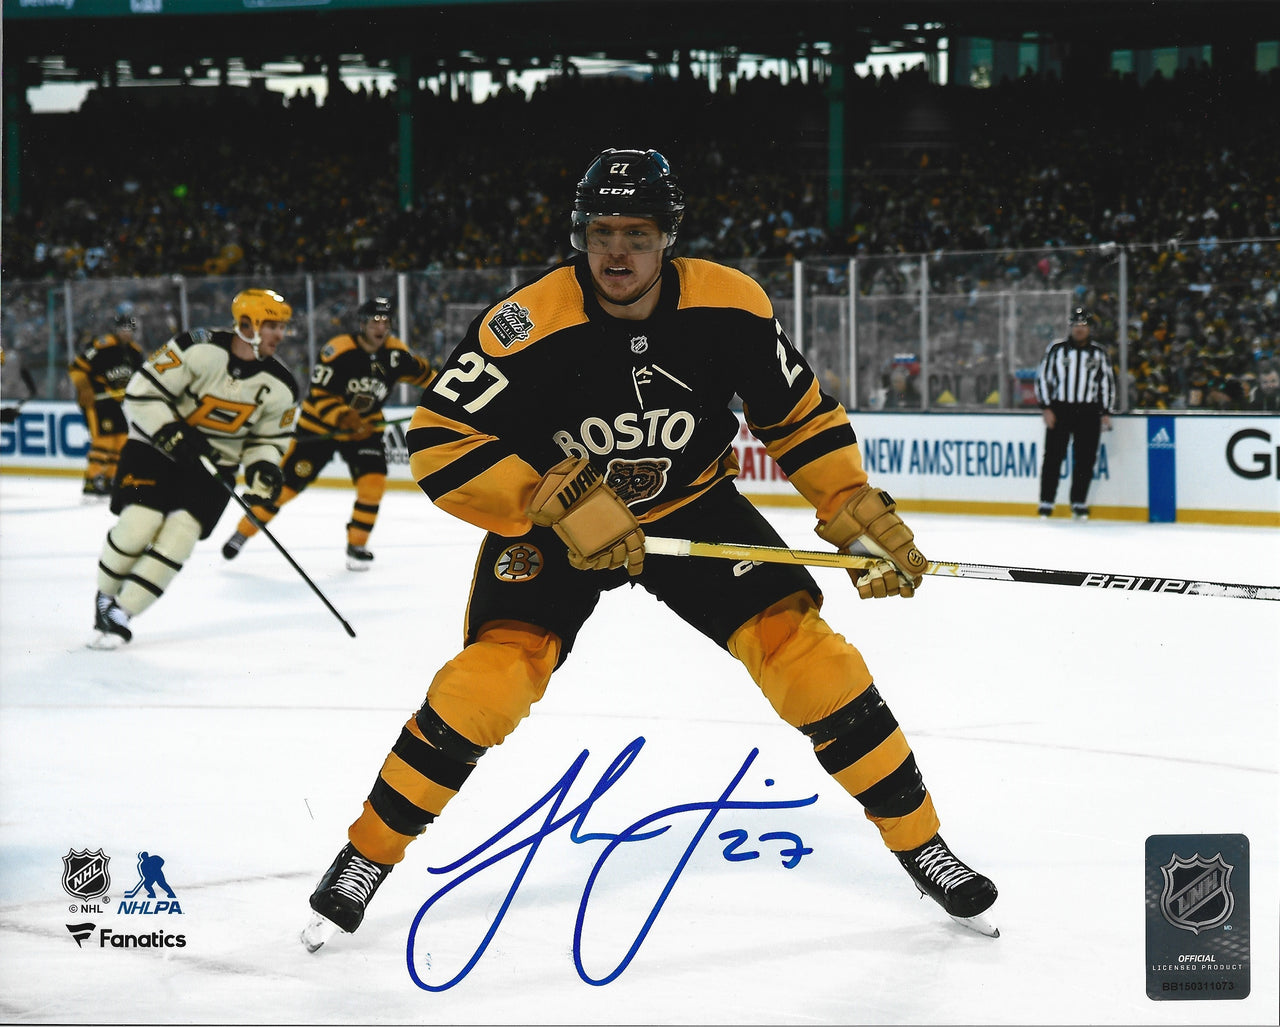 Hampus Lindholm Autographed Winter Classic Skate Photo - Dynasty Sports & Framing 